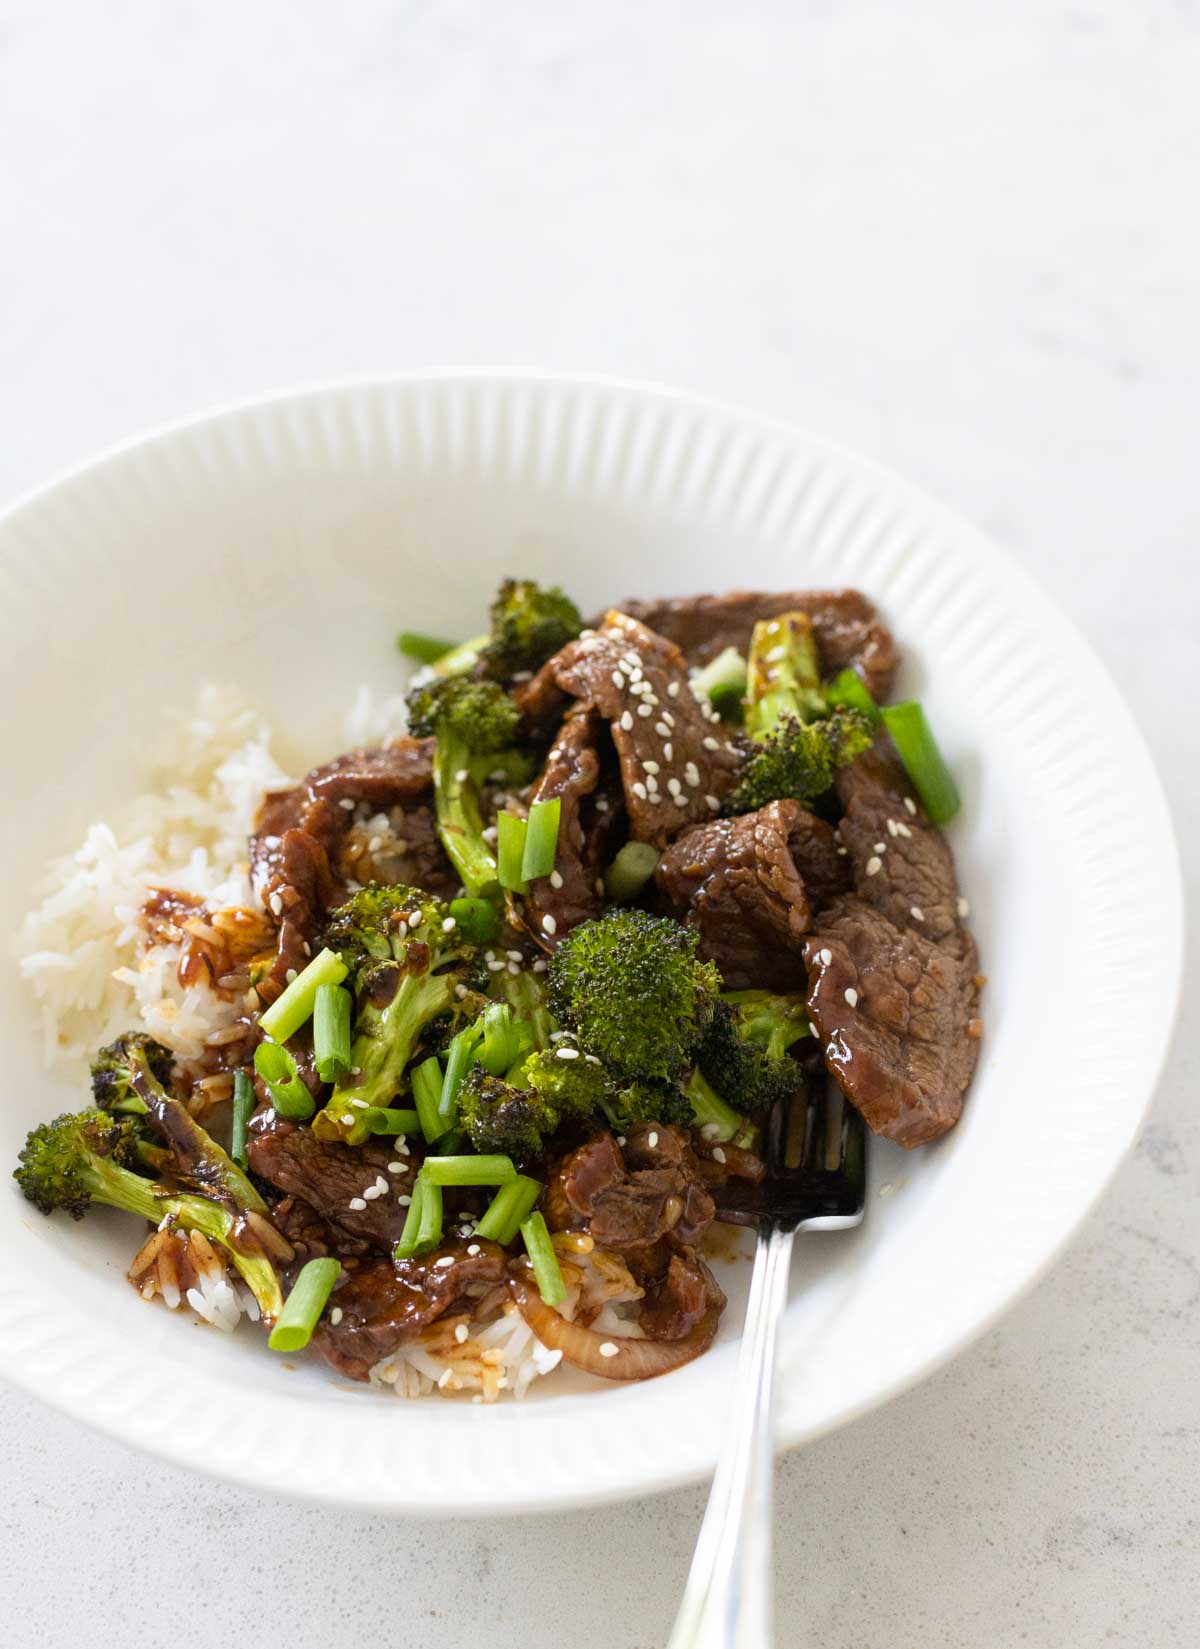 The beef and broccoli are in a white plate over a bed of rice.